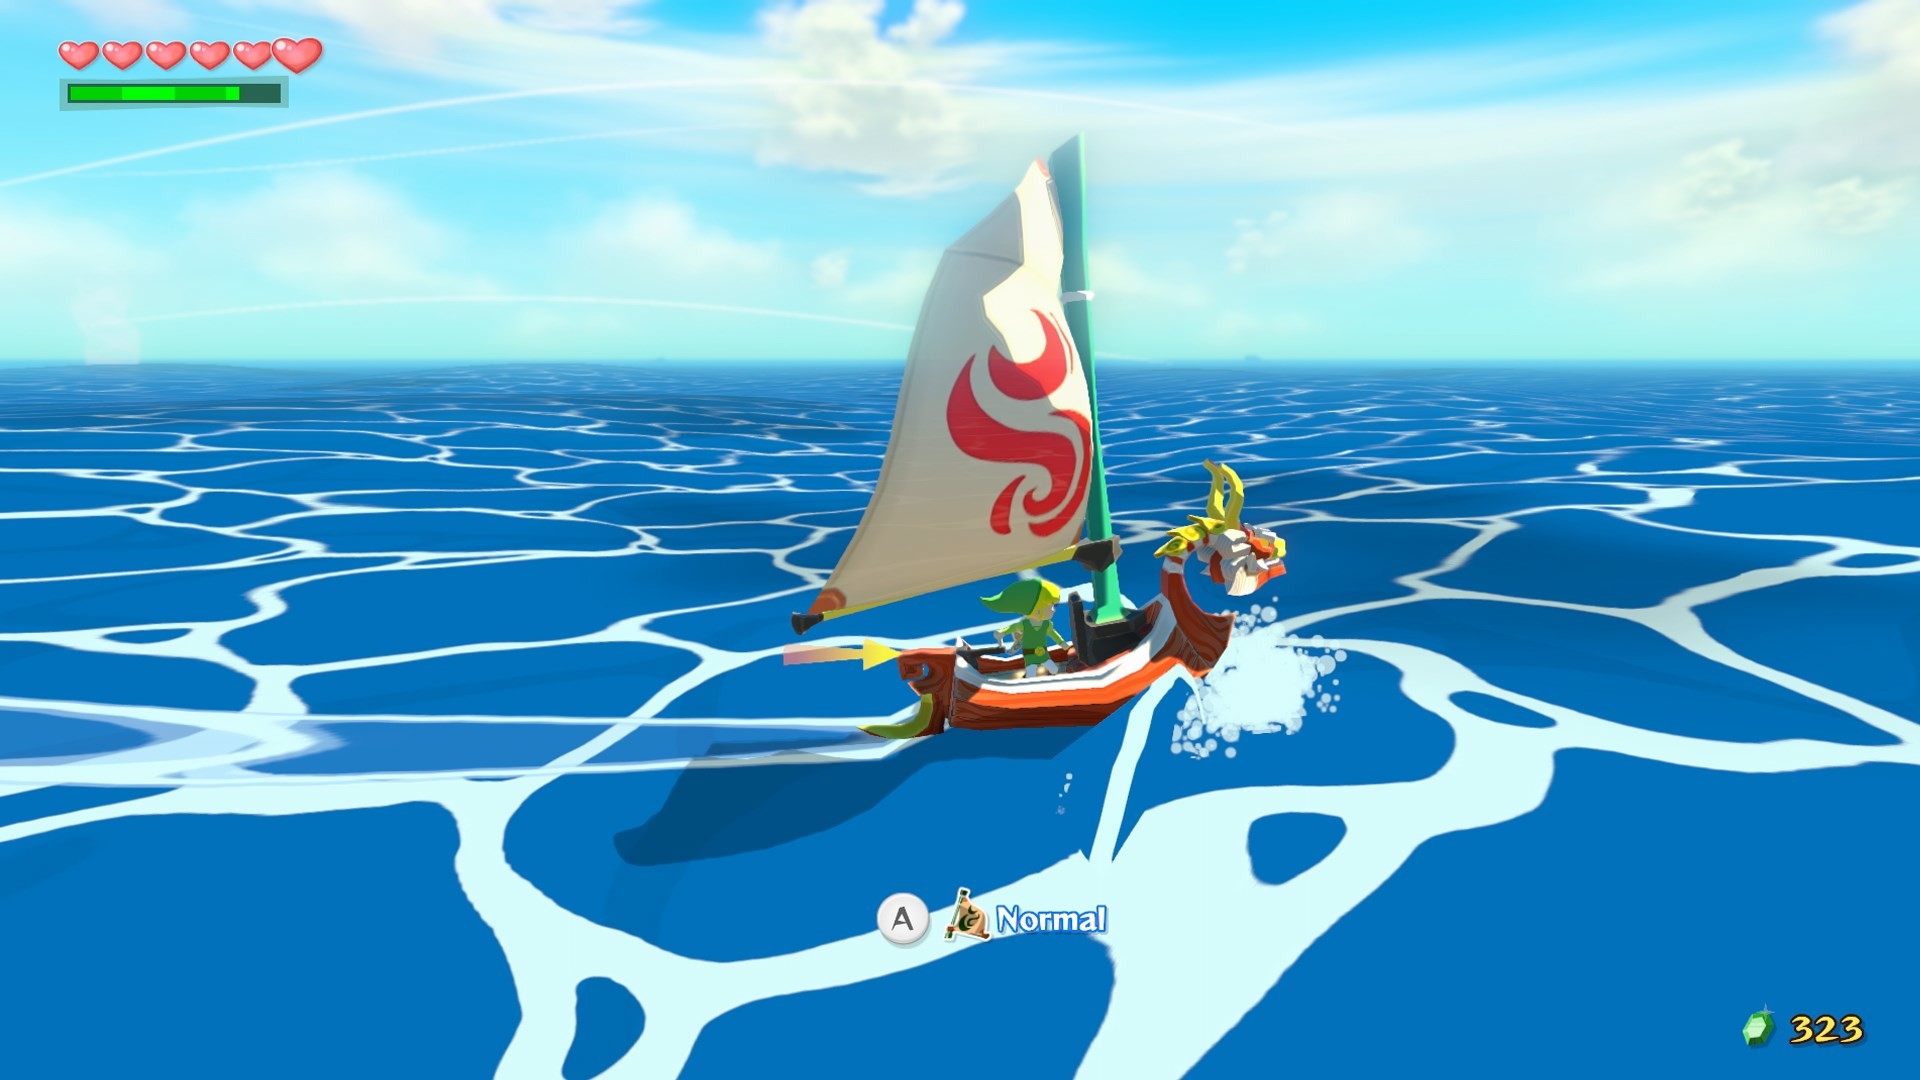 The Legend of Zelda The Wind Waker HD screenshots, images and pictures – Giant Bomb